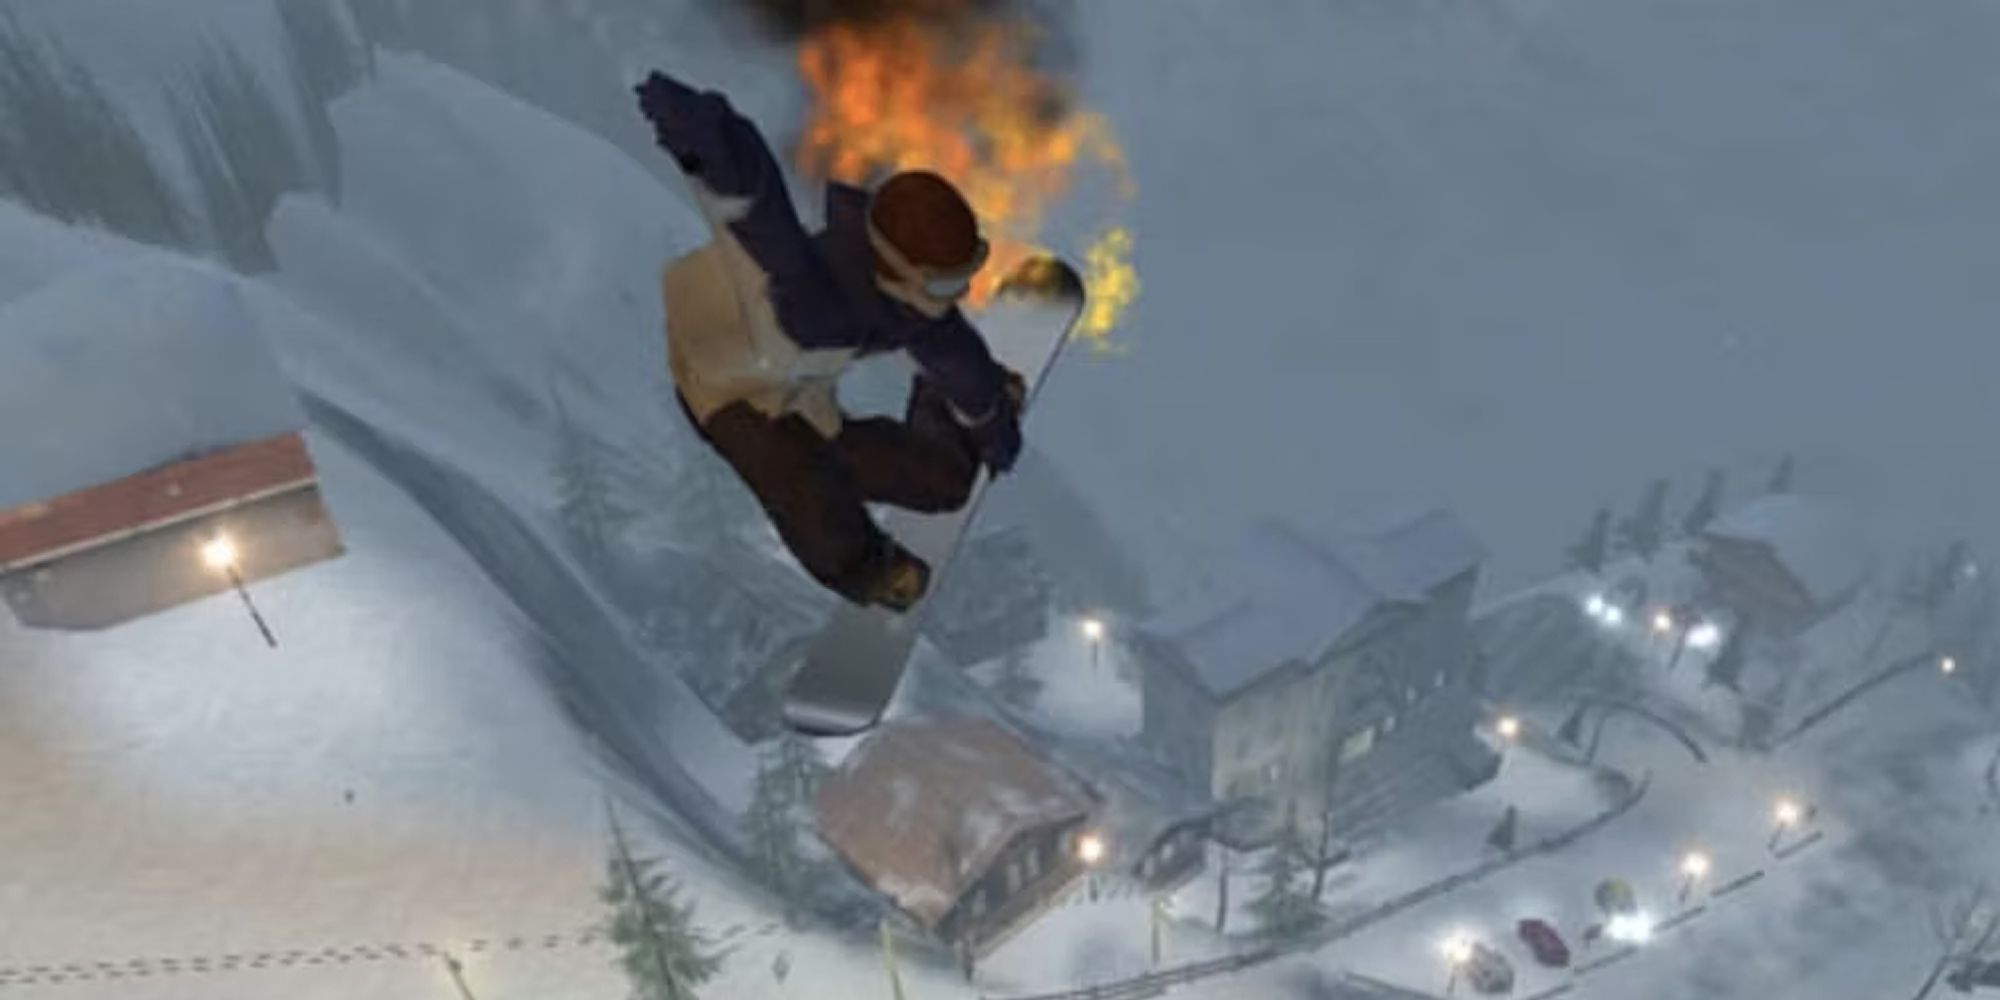 Transworld Snowboarding Snowboarder Getting Serious Air